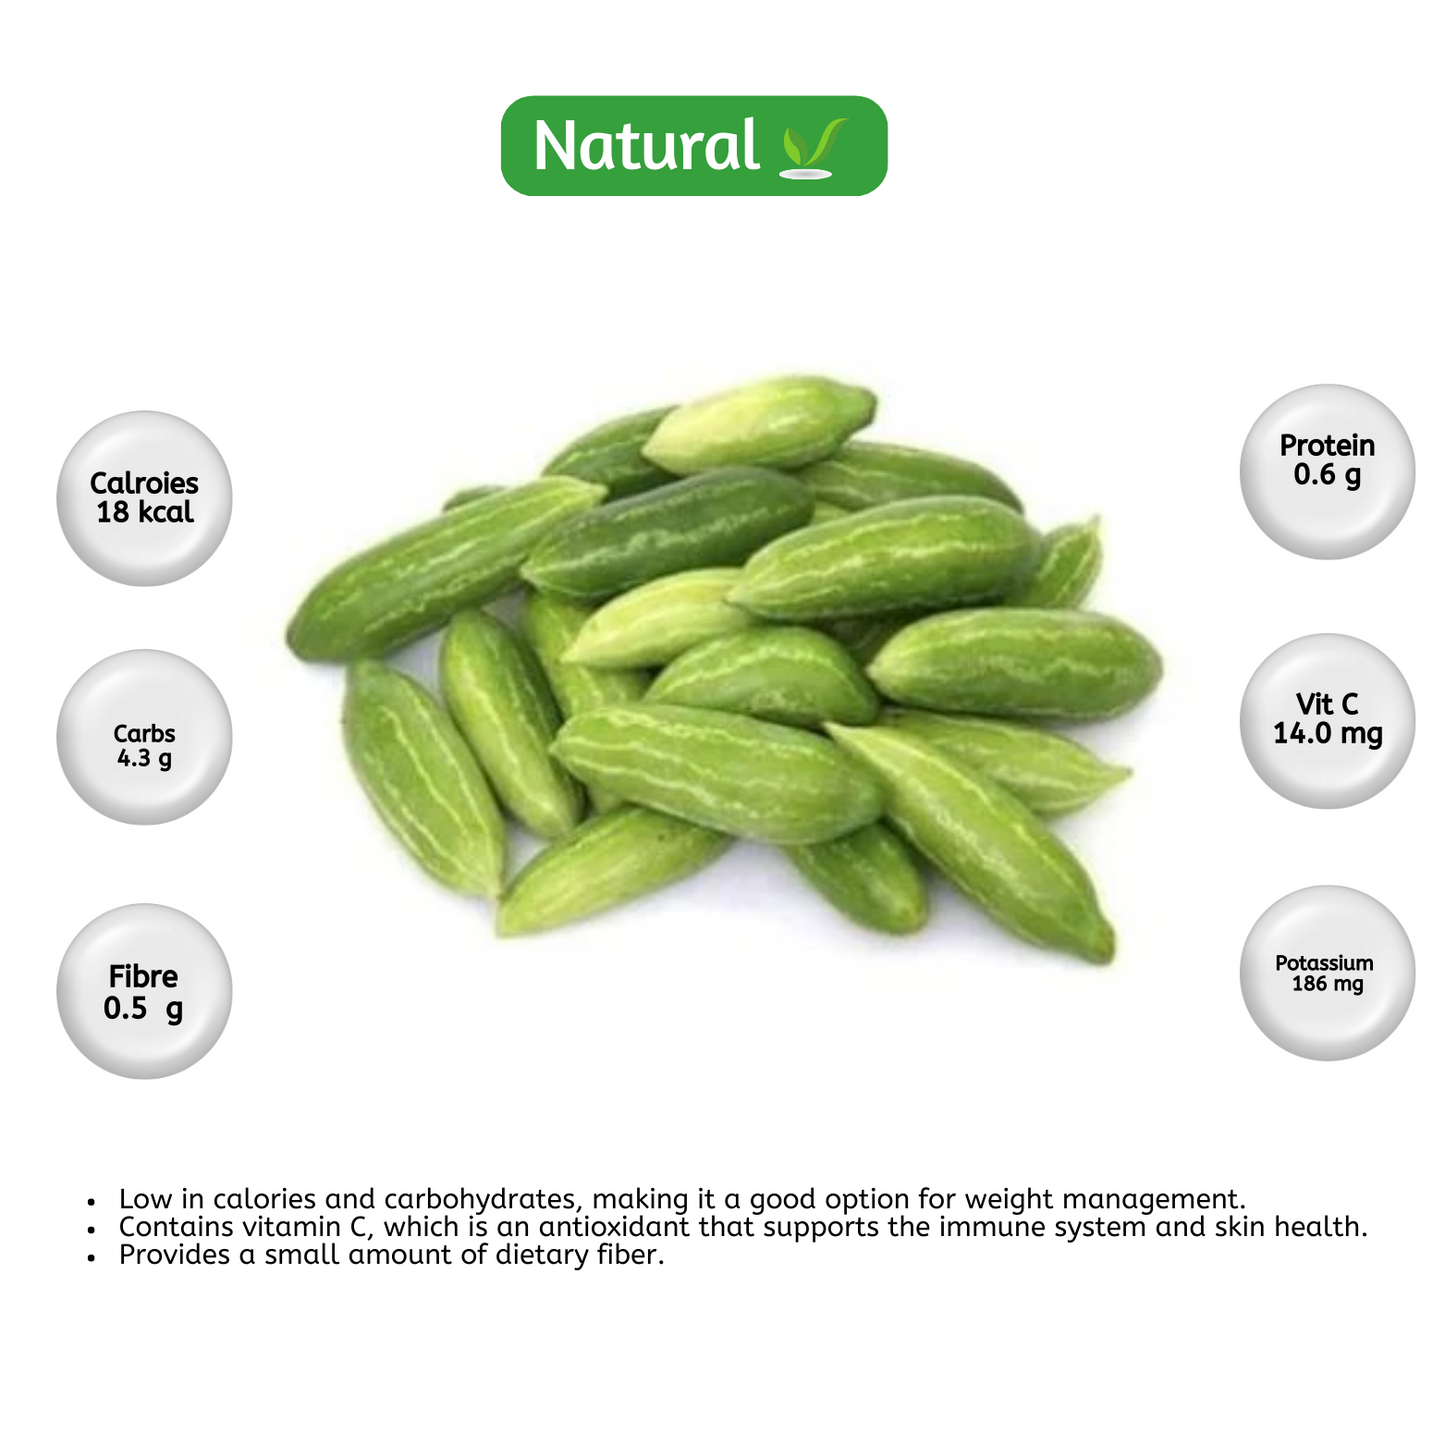 organic Little Gourd - Online store for organic products in Bangalore - Tondekaayi | Vegetables